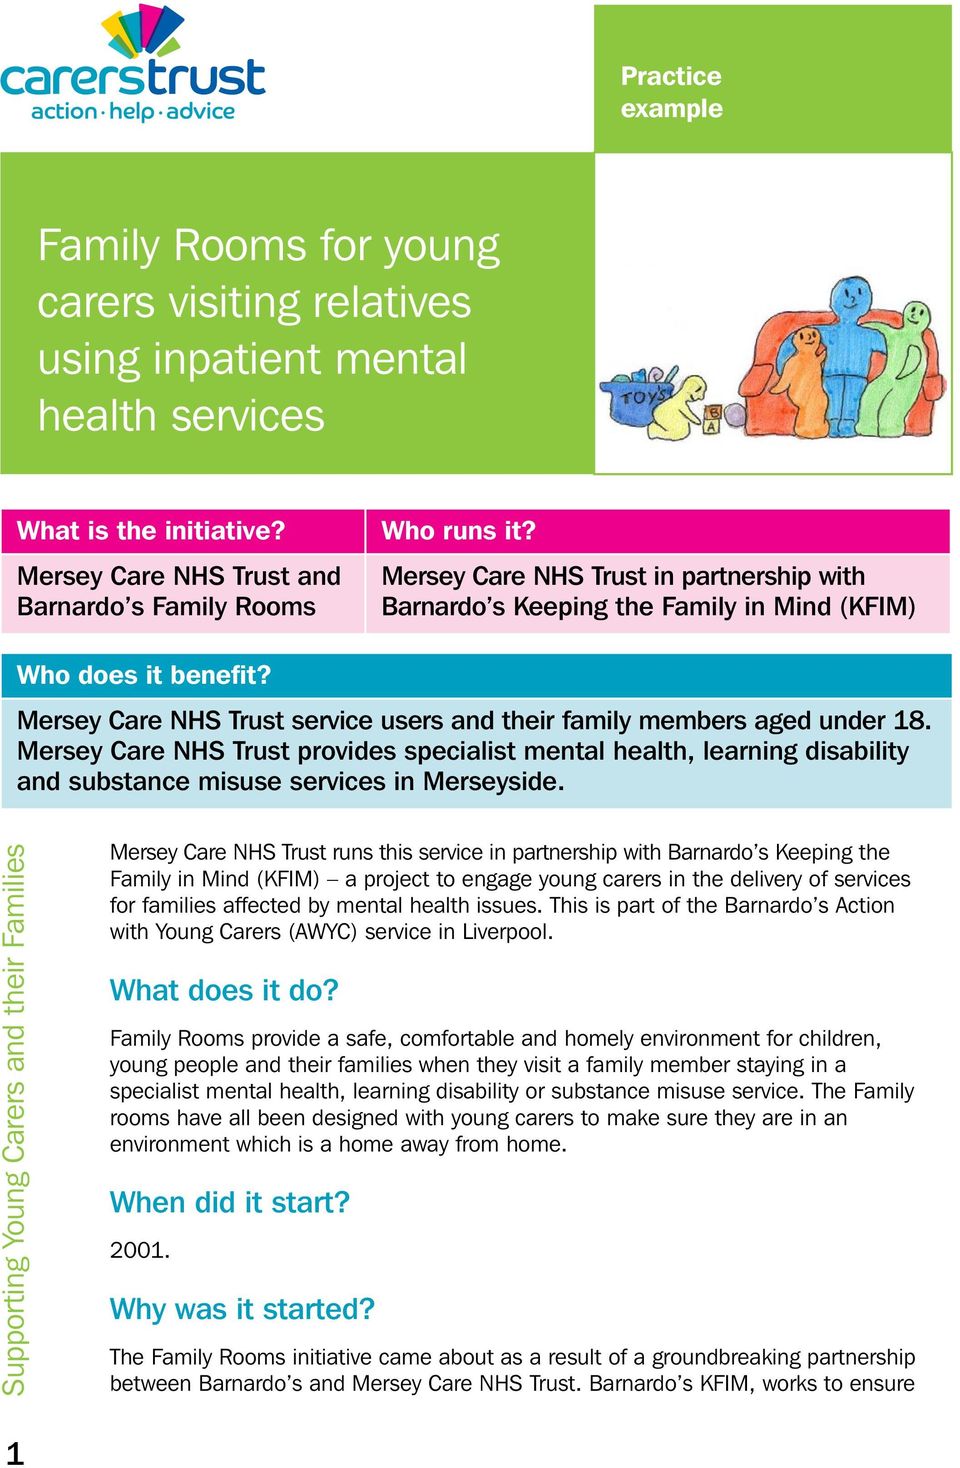 Mersey Care NHS Trust provides specialist mental health, learning disability and substance misuse services in Merseyside.